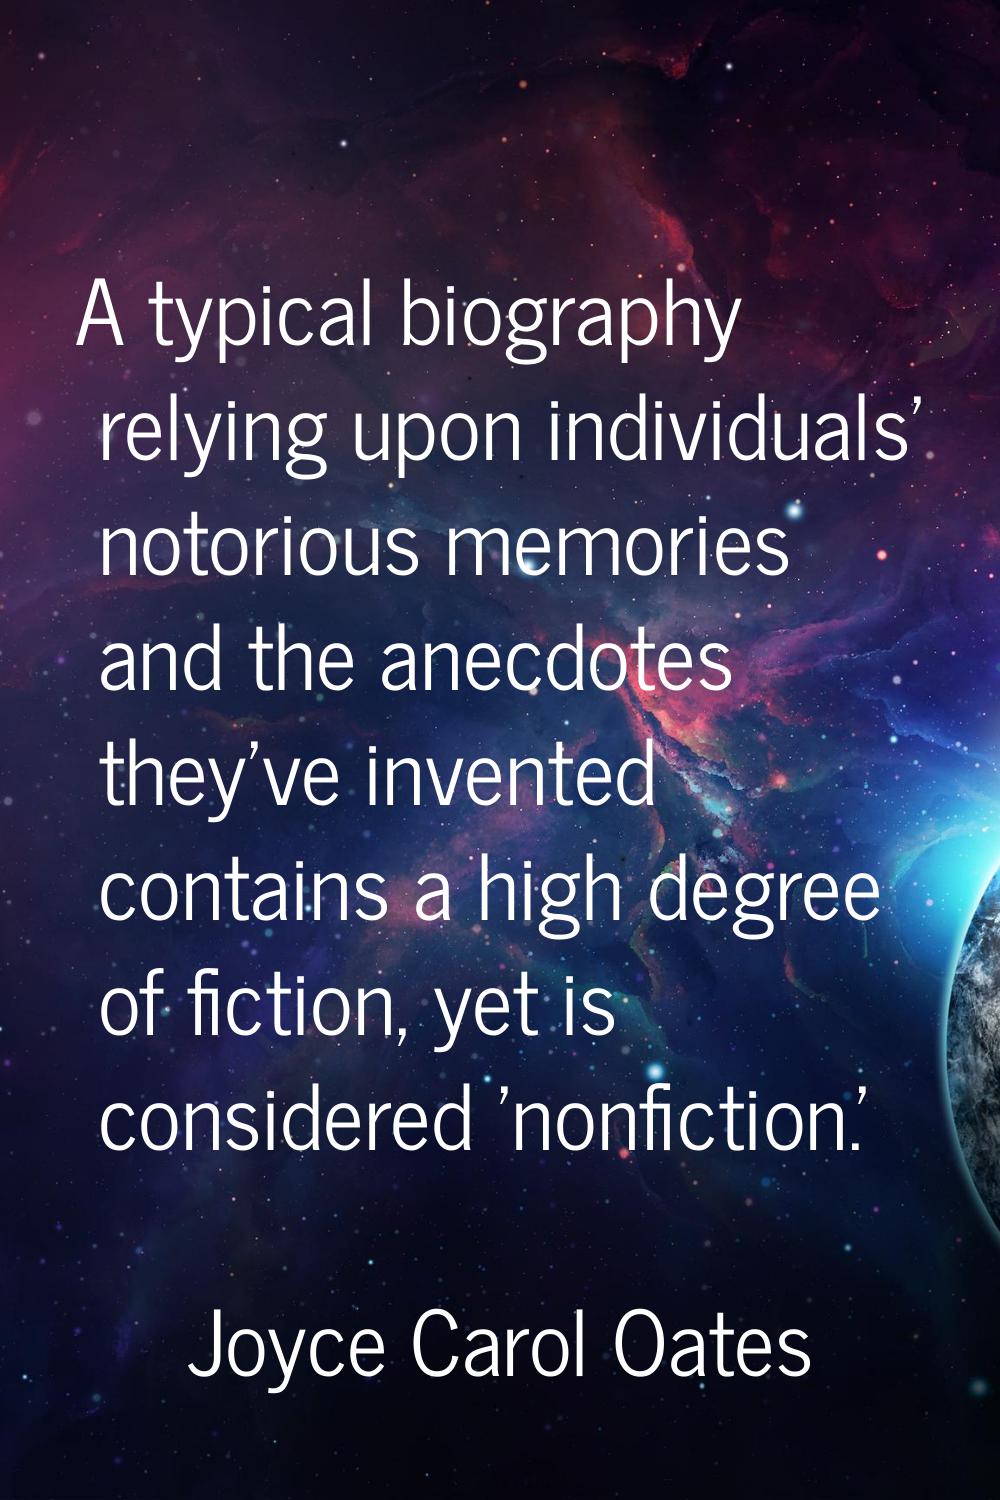 A typical biography relying upon individuals' notorious memories and the anecdotes they've invented